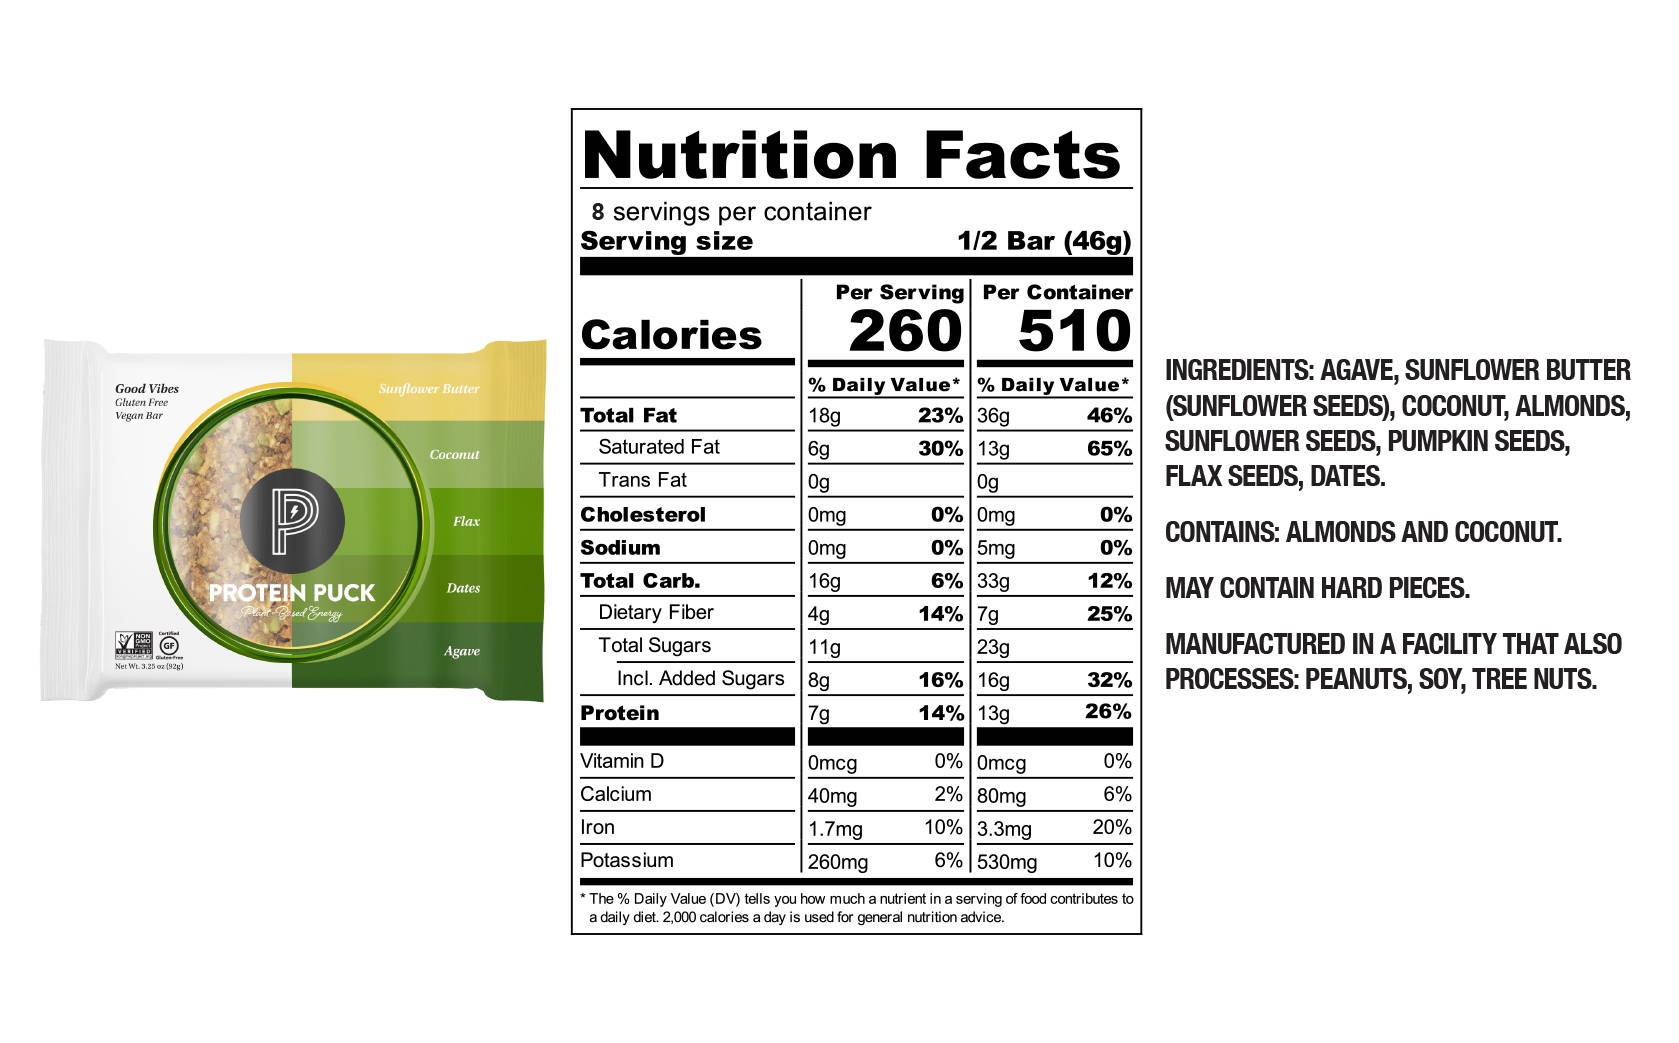 Variety Packs' Good Vibes Nutrition Facts 